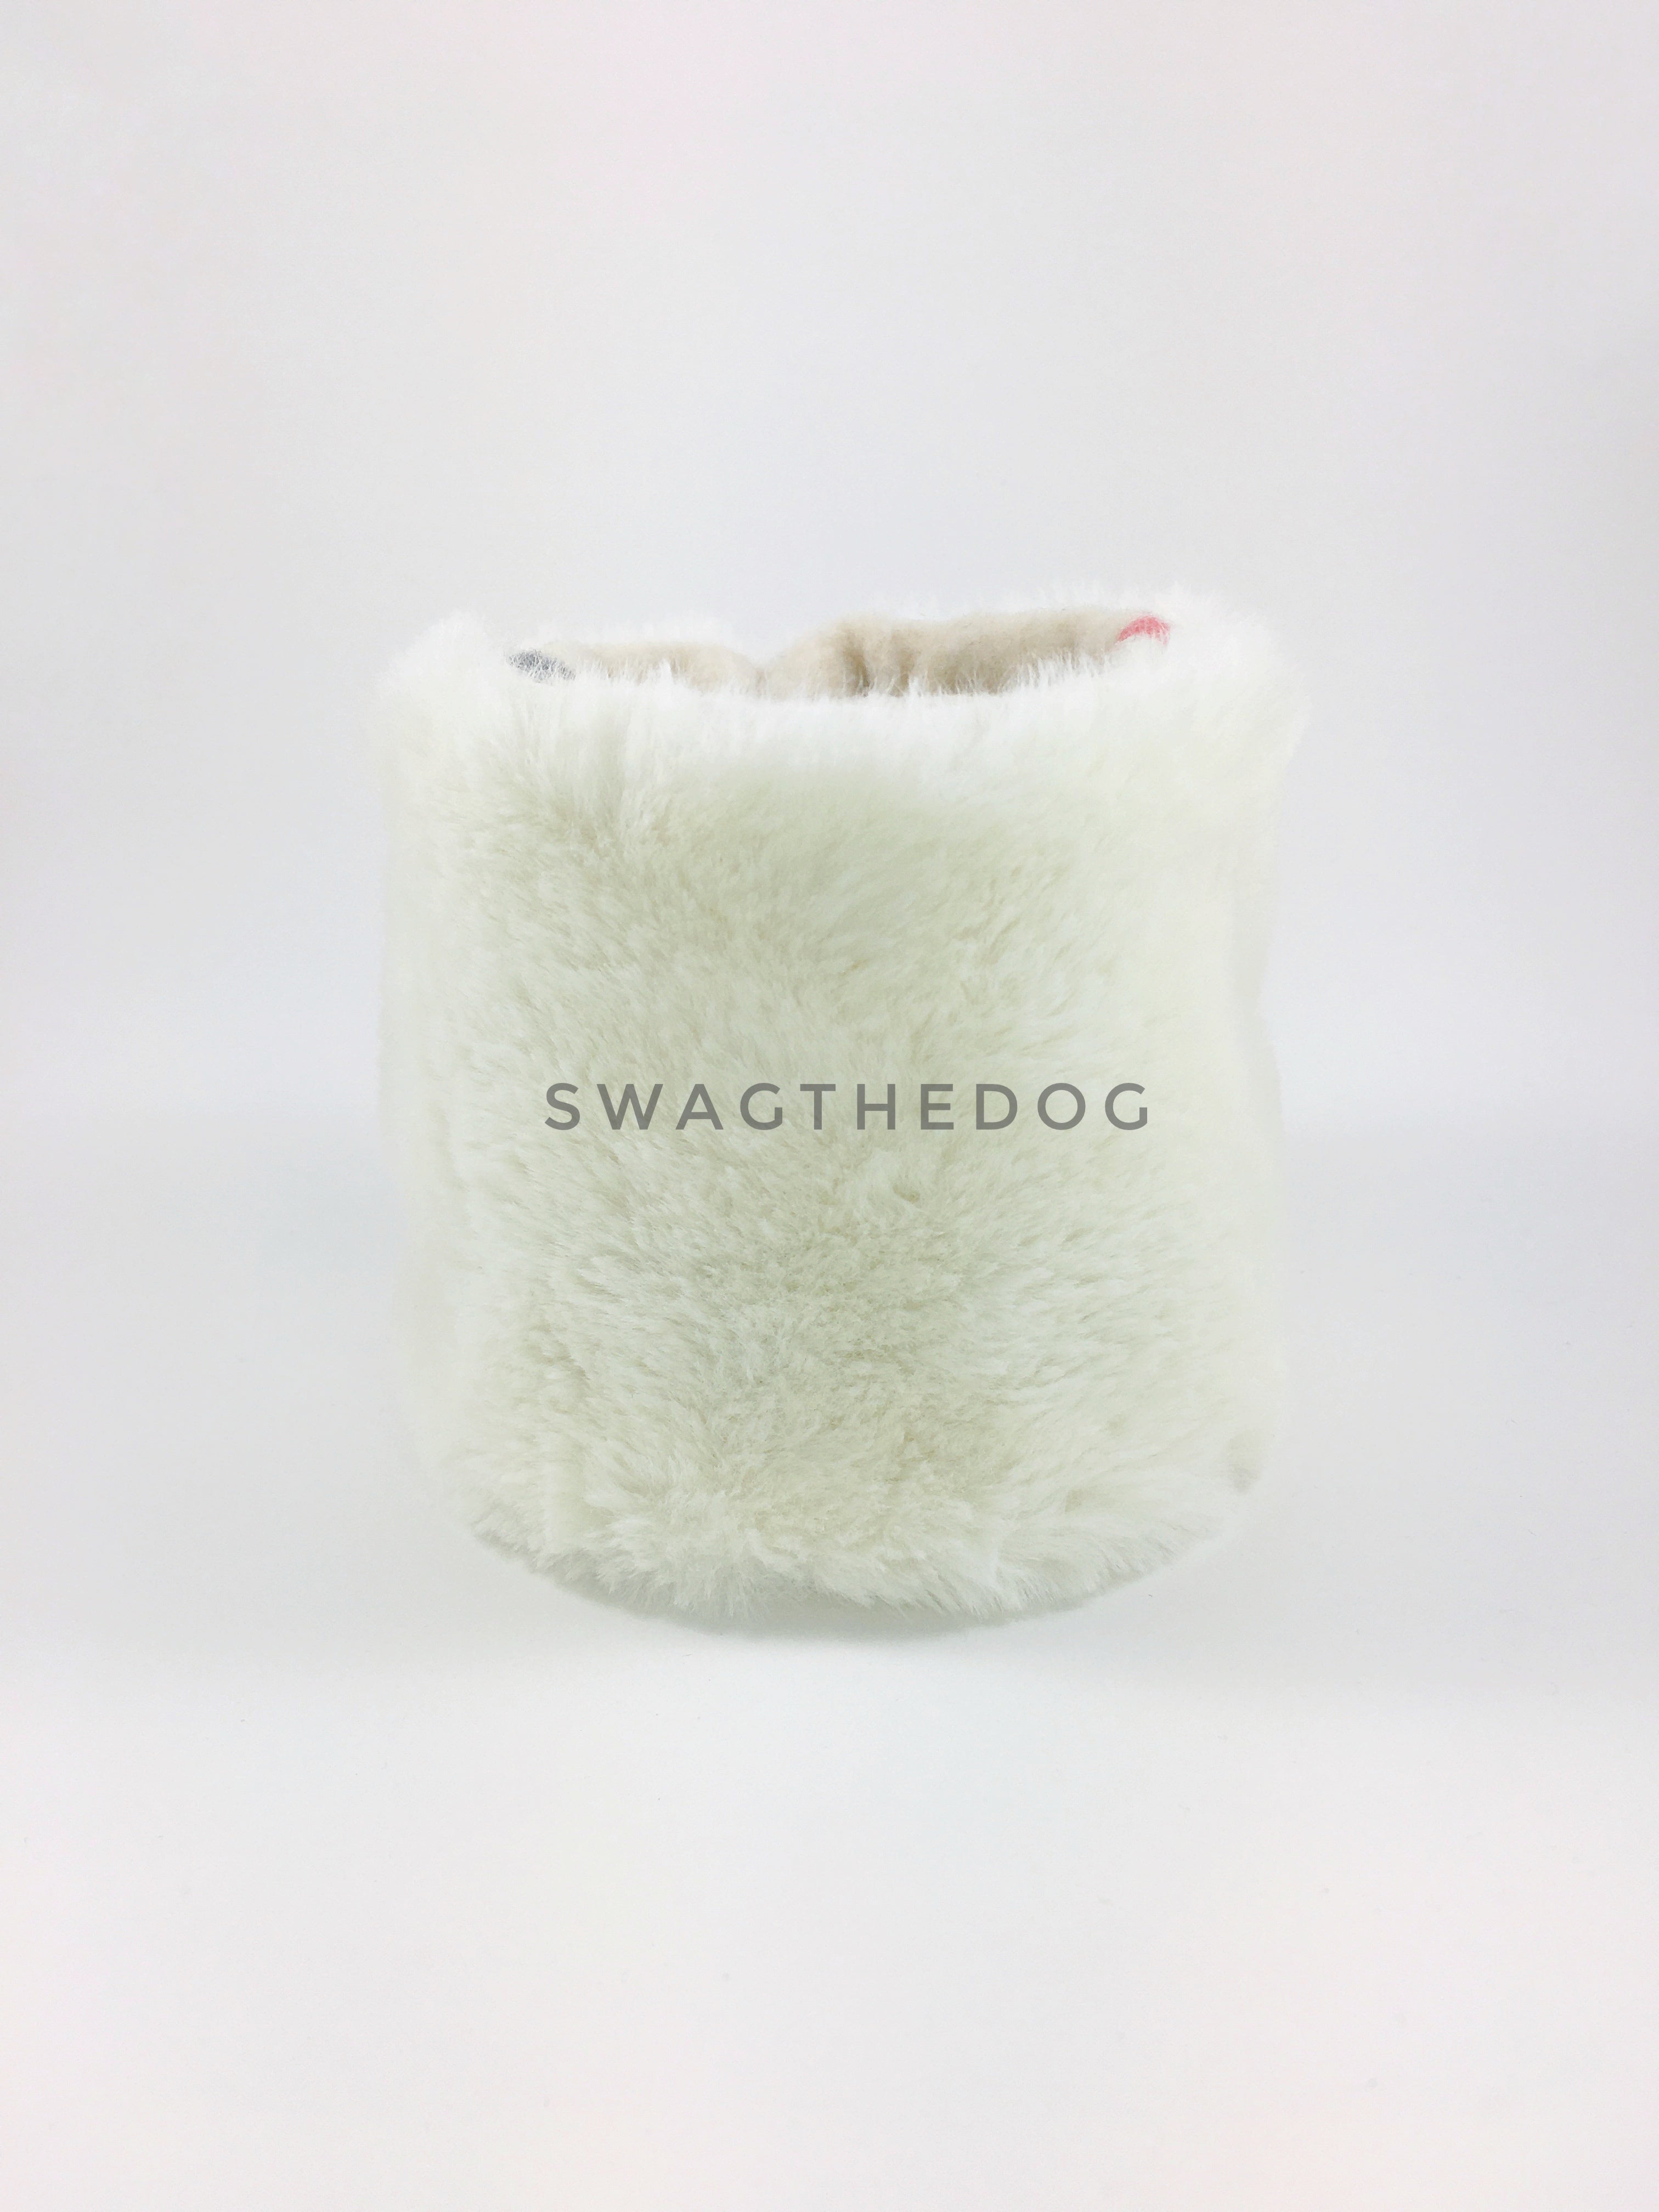 Furberry Swagsnood - Product Front View. Faux Fur side